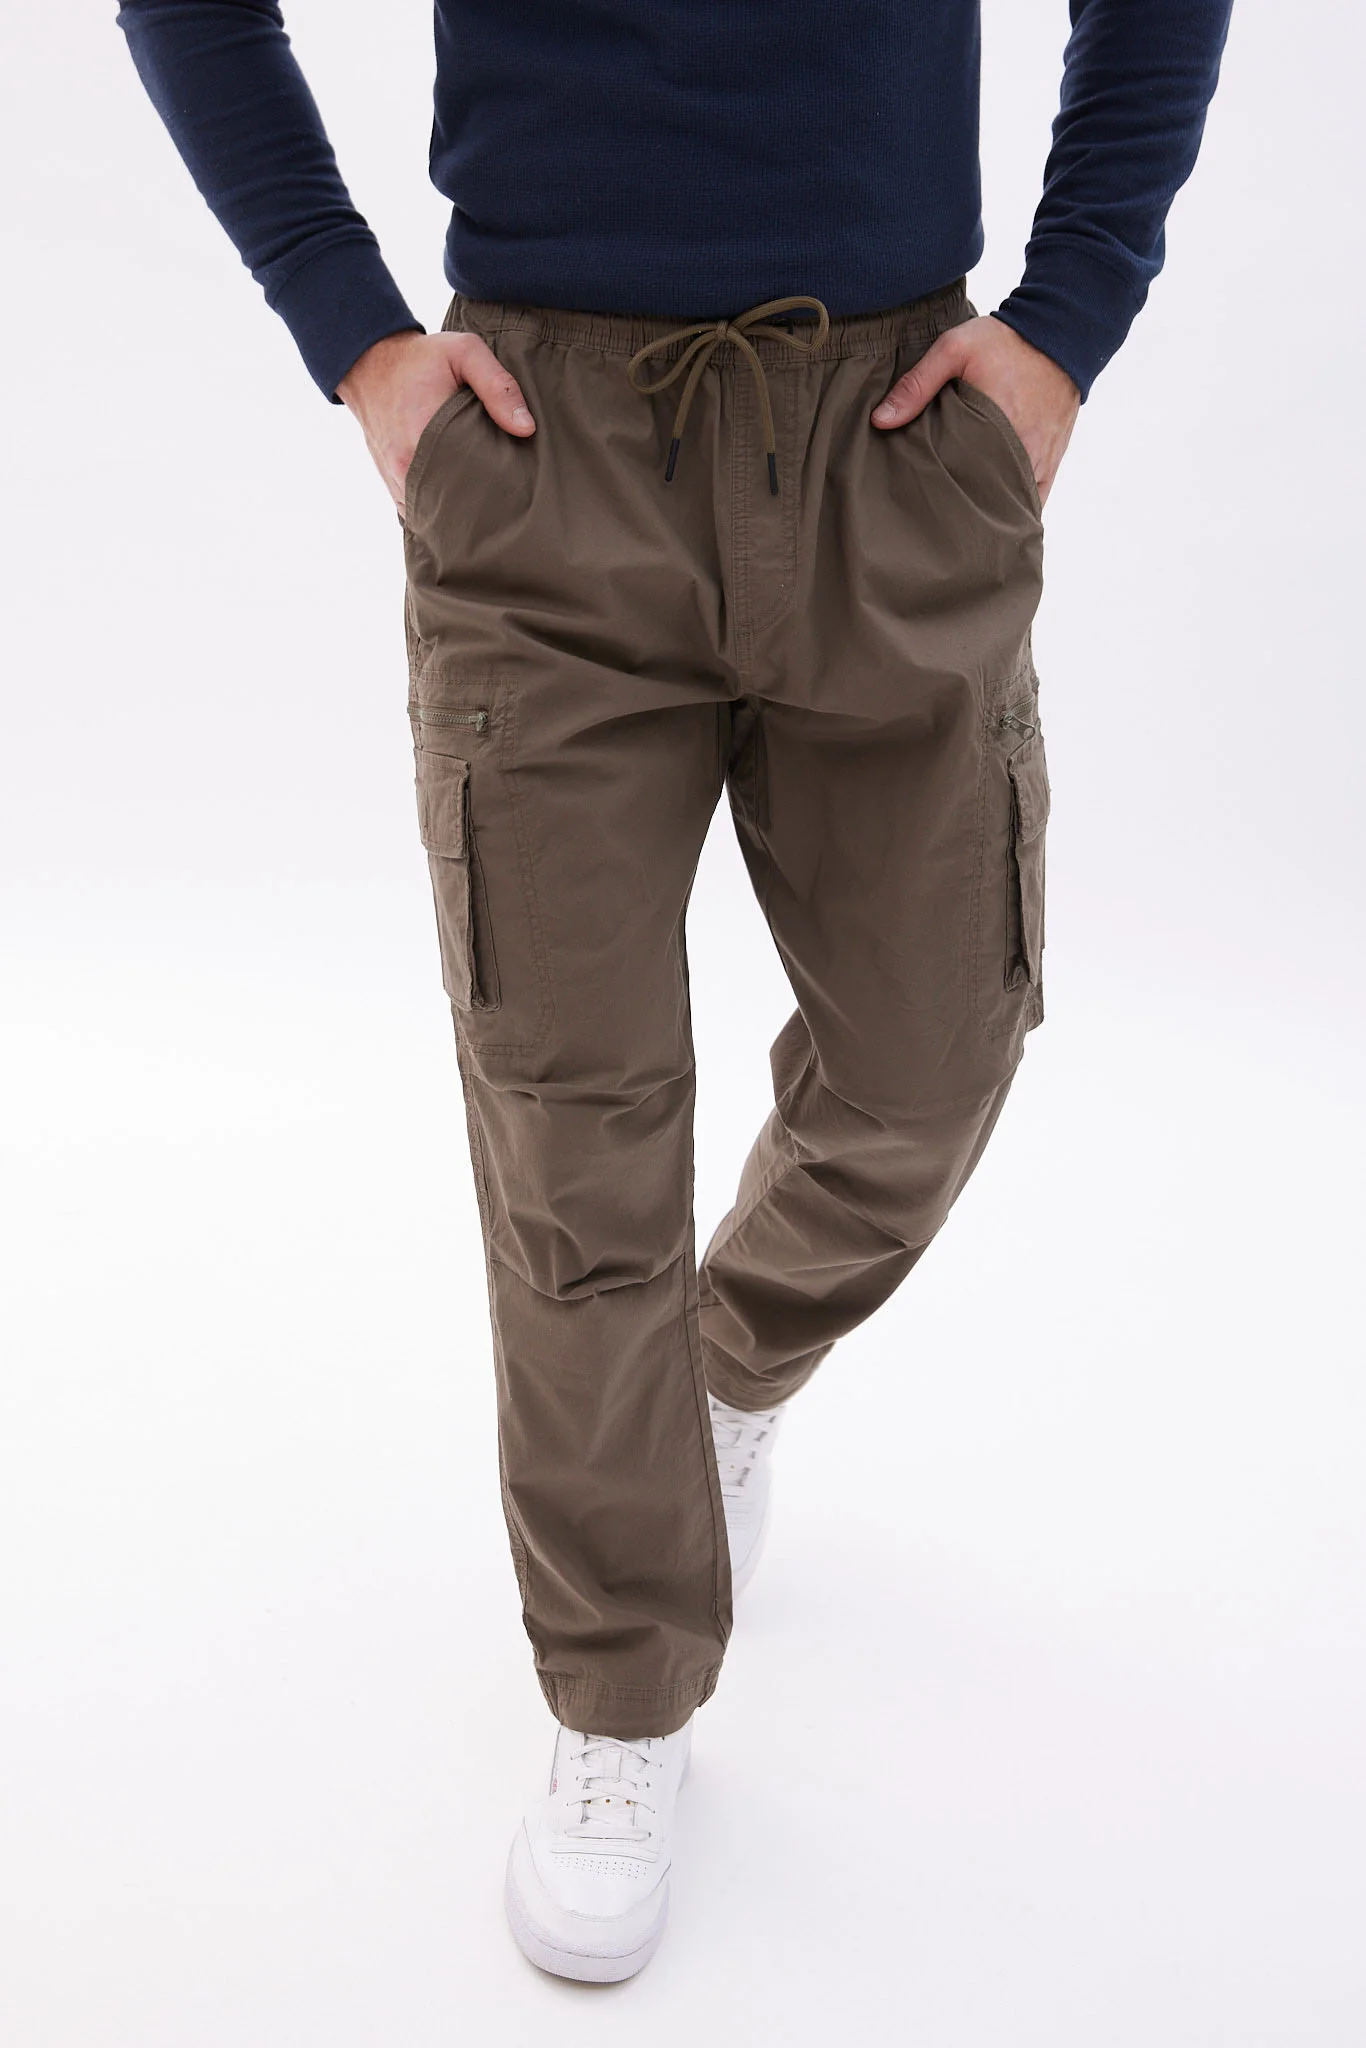 A man wearing modern cargo pants and white shoes.